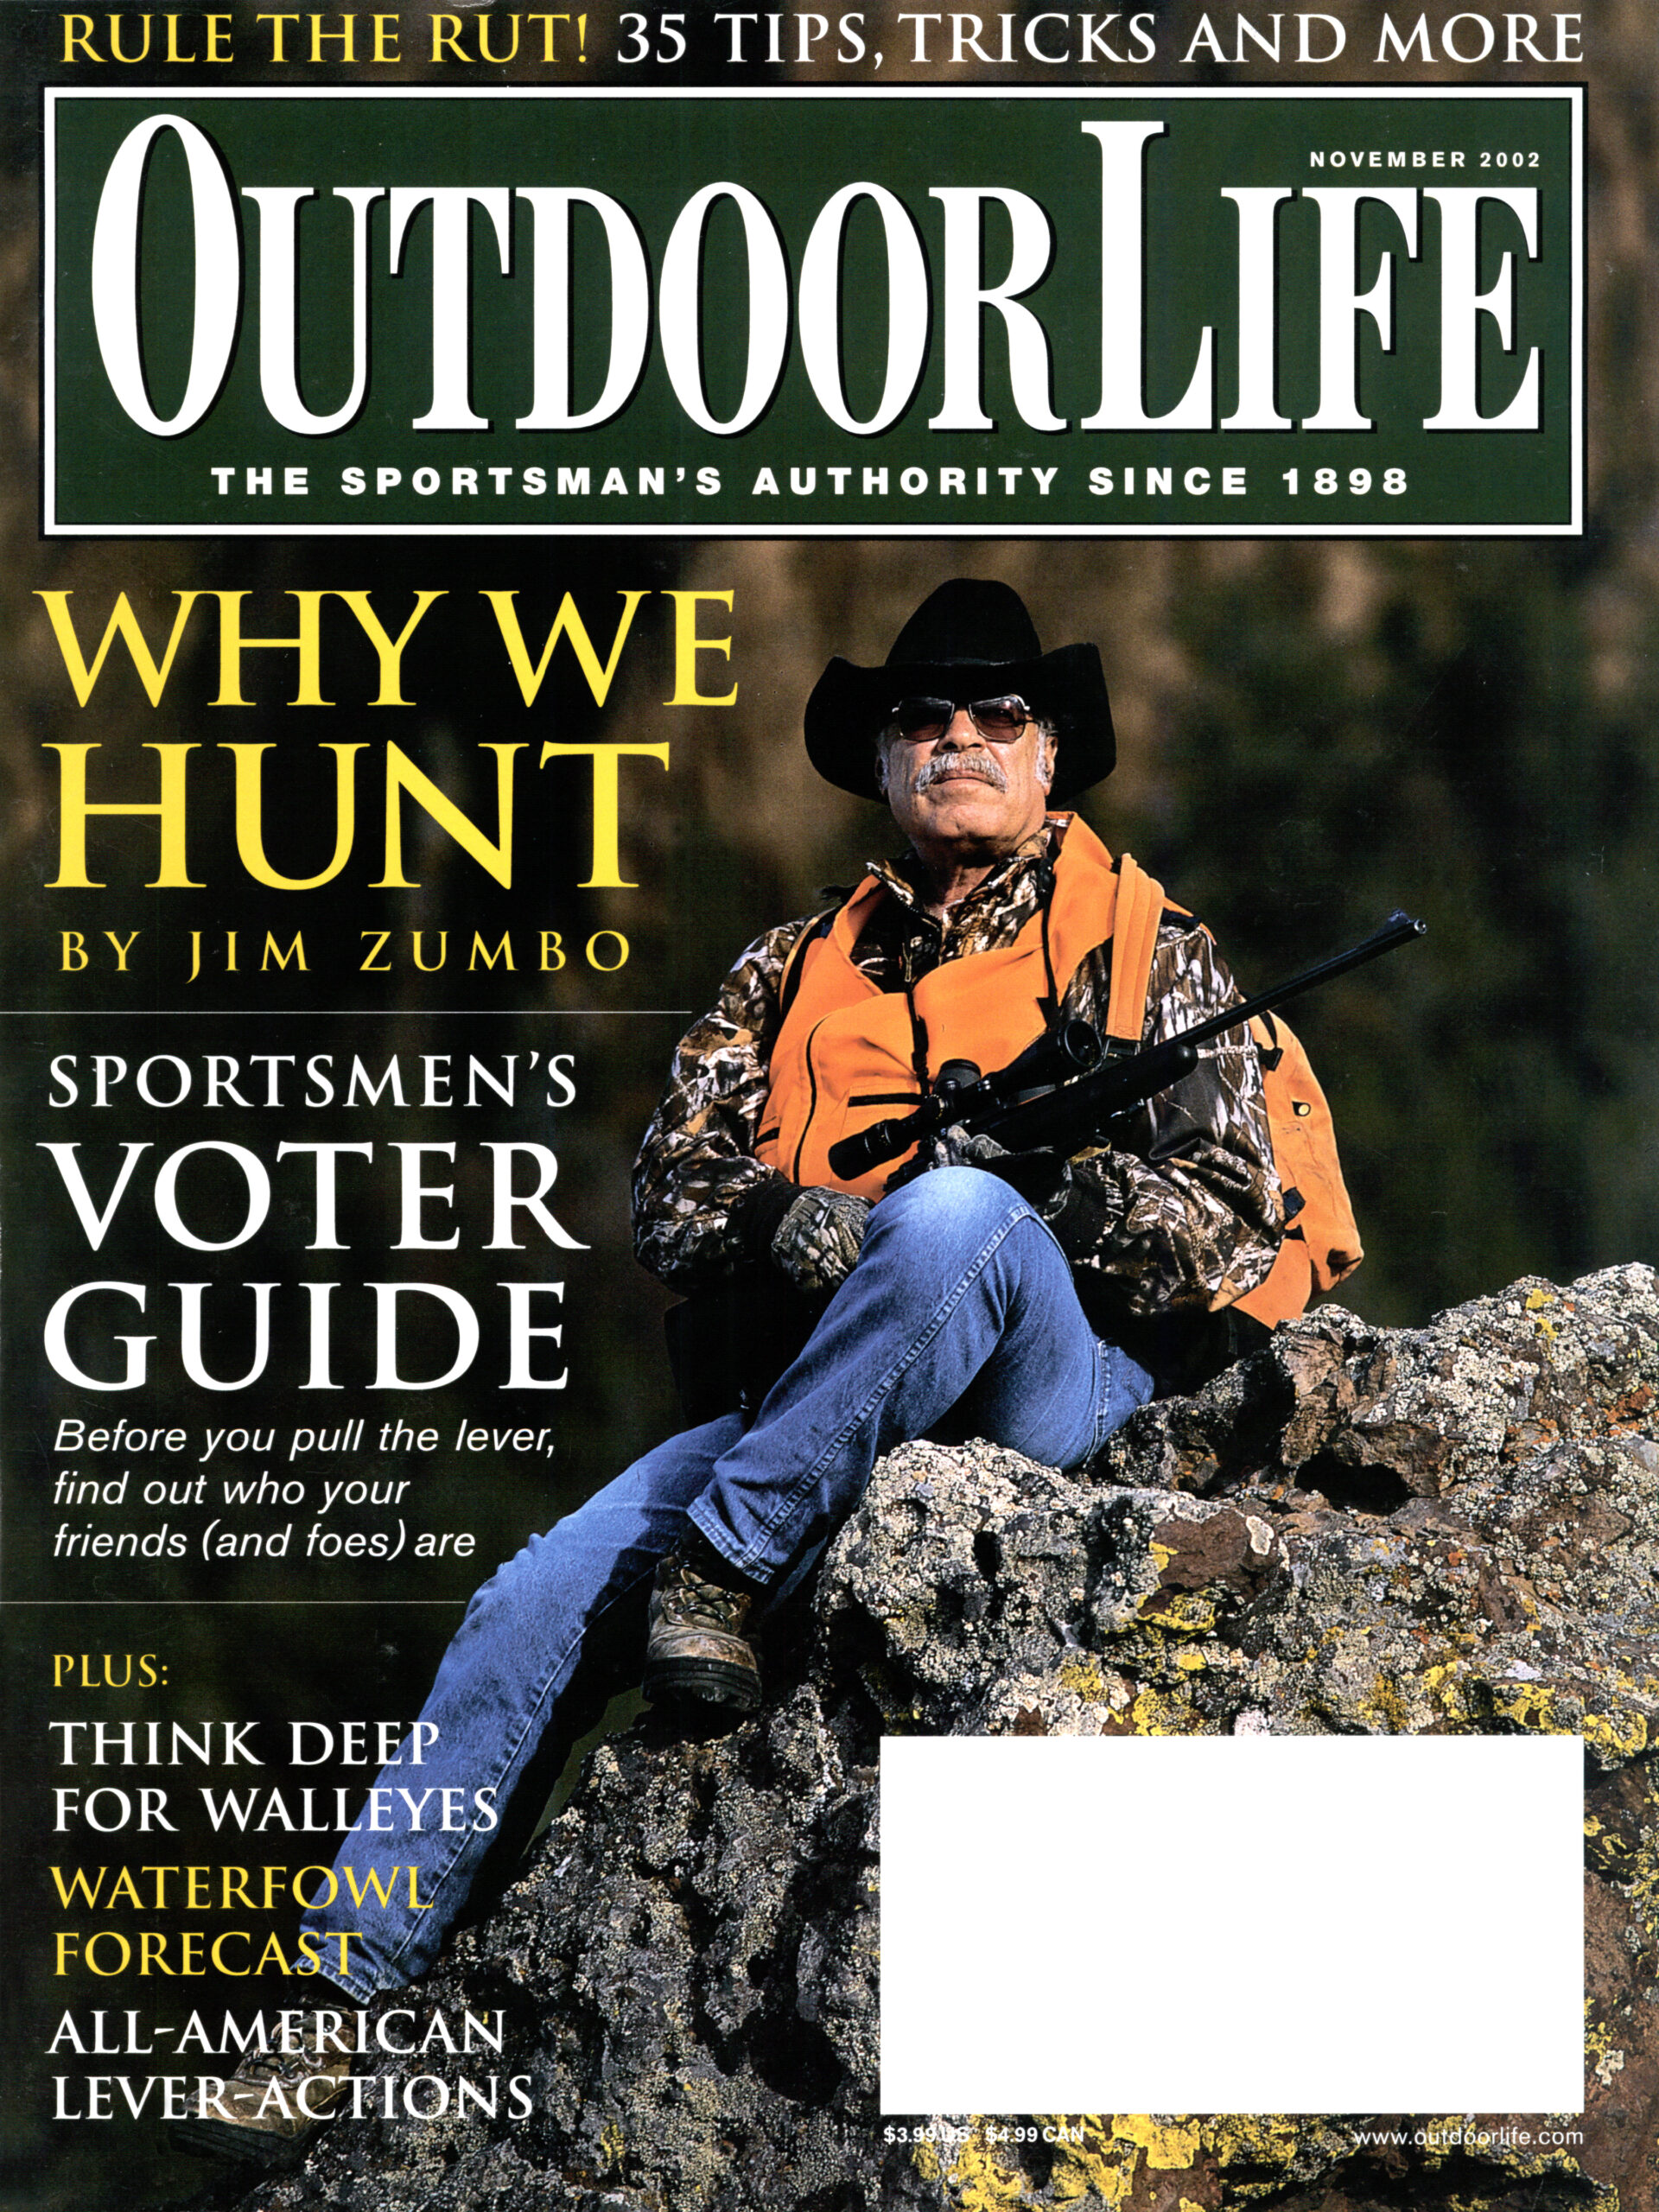 The Jim Zumbo cover of Outdoor Life magazine in November 2002.